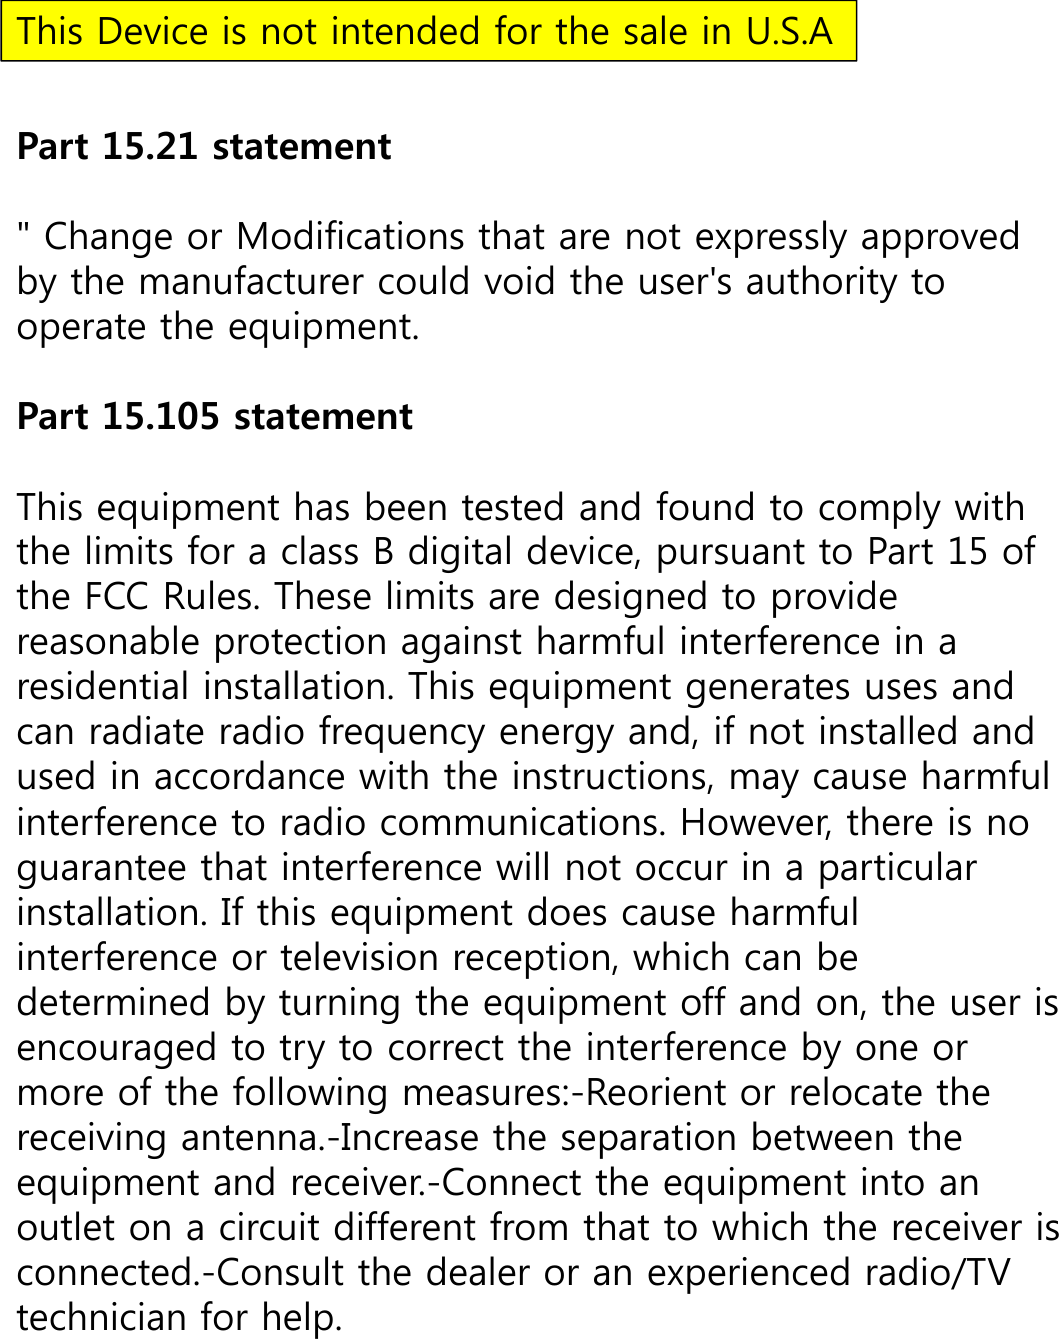 Part 15.21 statement&quot; Change or Modifications that are not expressly approved by the manufacturer could void the user&apos;s authority to operate the equipment. Part 15.105 statement This equipment has been tested and found to comply with the limits for a class B digital device, pursuant to Part 15 of the FCC Rules. These limits are designed to provide reasonable protection against harmful interference in a residential installation. This equipment generates uses and can radiate radio frequency energy and, if not installed and used in accordance with the instructions, may cause harmful interference to radio communications. However, there is no guarantee that interference will not occur in a particular installation. If this equipment does cause harmful interference or television reception, which can be determined by turning the equipment off and on, the user is encouraged to try to correct the interference by one or more of the following measures:-Reorient or relocate the receiving antenna.-Increase the separation between the equipment and receiver.-Connect the equipment into an outlet on a circuit different from that to which the receiver is connected.-Consult the dealer or an experienced radio/TV technician for help.This Device is not intended for the sale in U.S.A